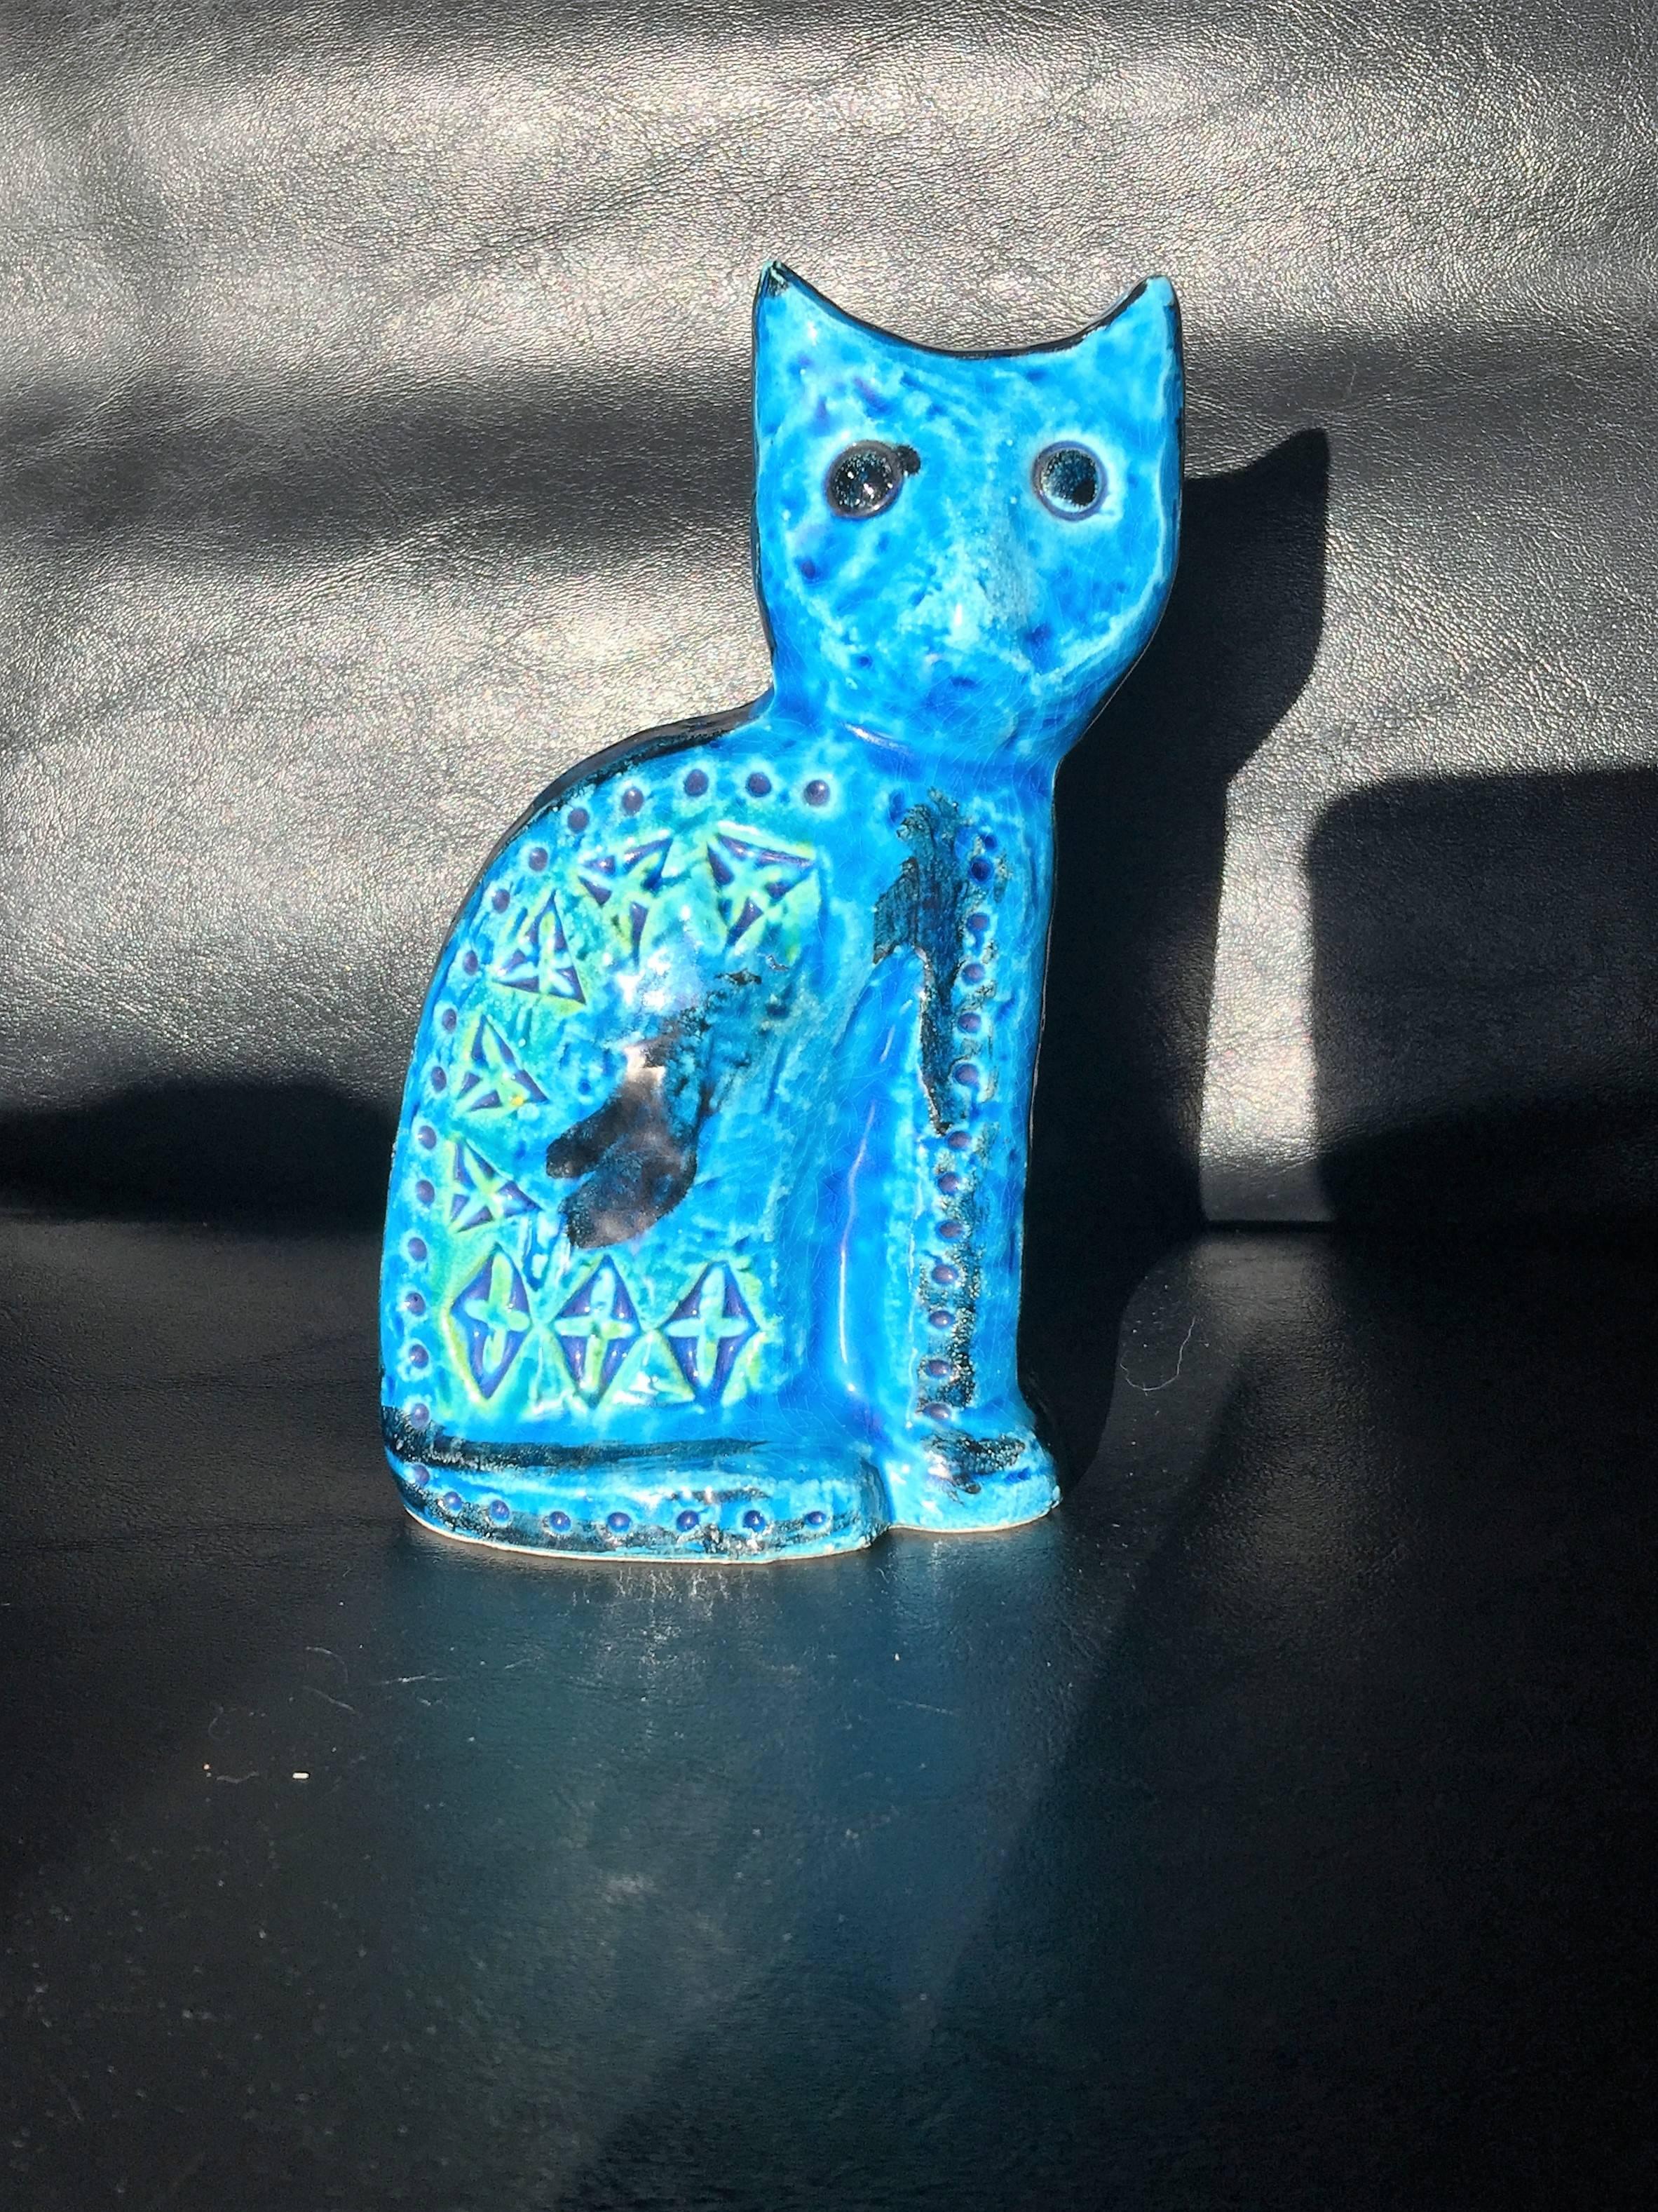 Nice Italian ceramic cat by Bitossi in vivid turquoise, black and tinged with yellow green colors and star and cross indented designs.